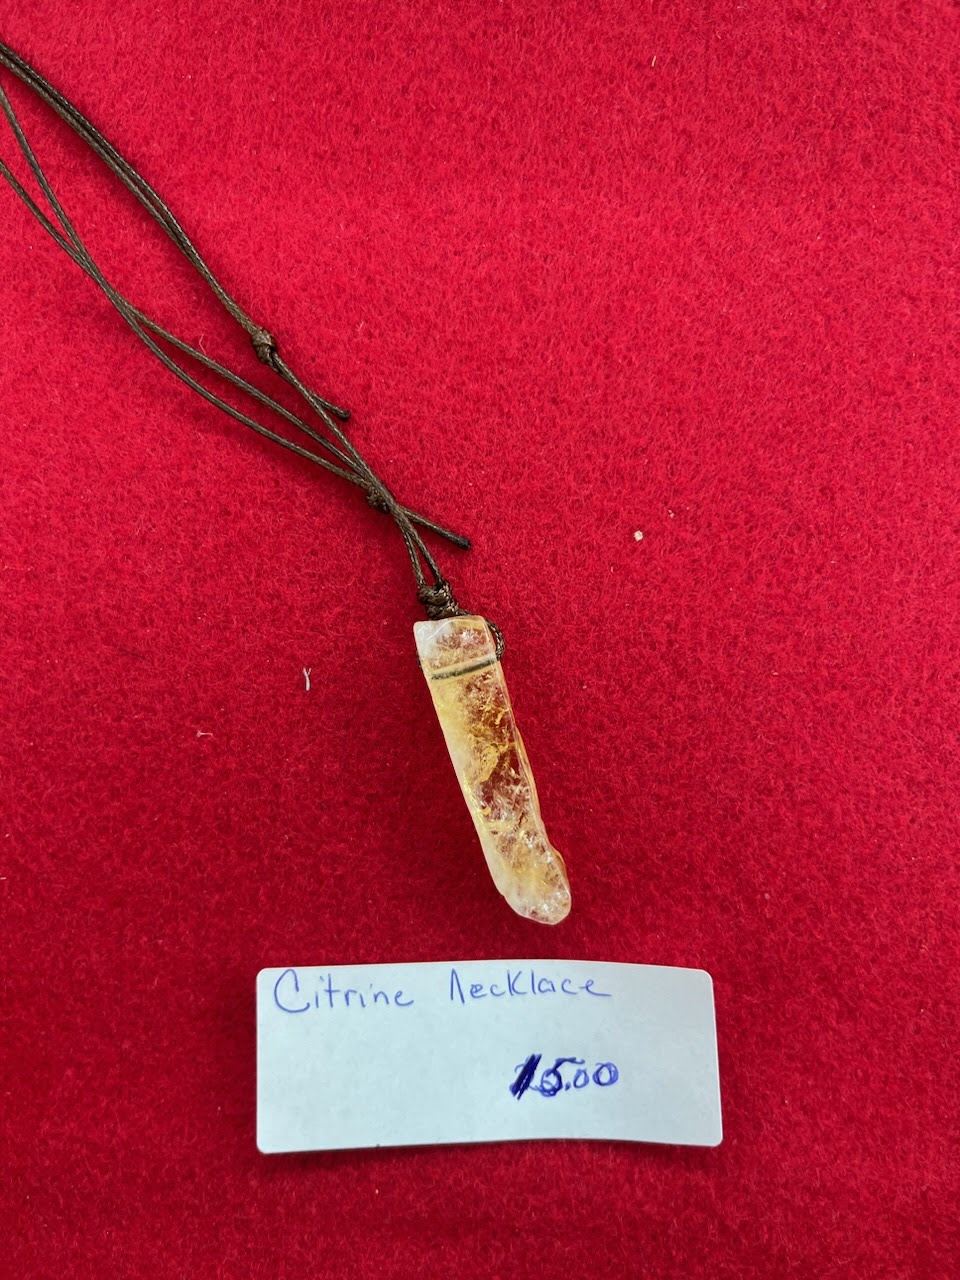 A small bone necklace on a red cloth